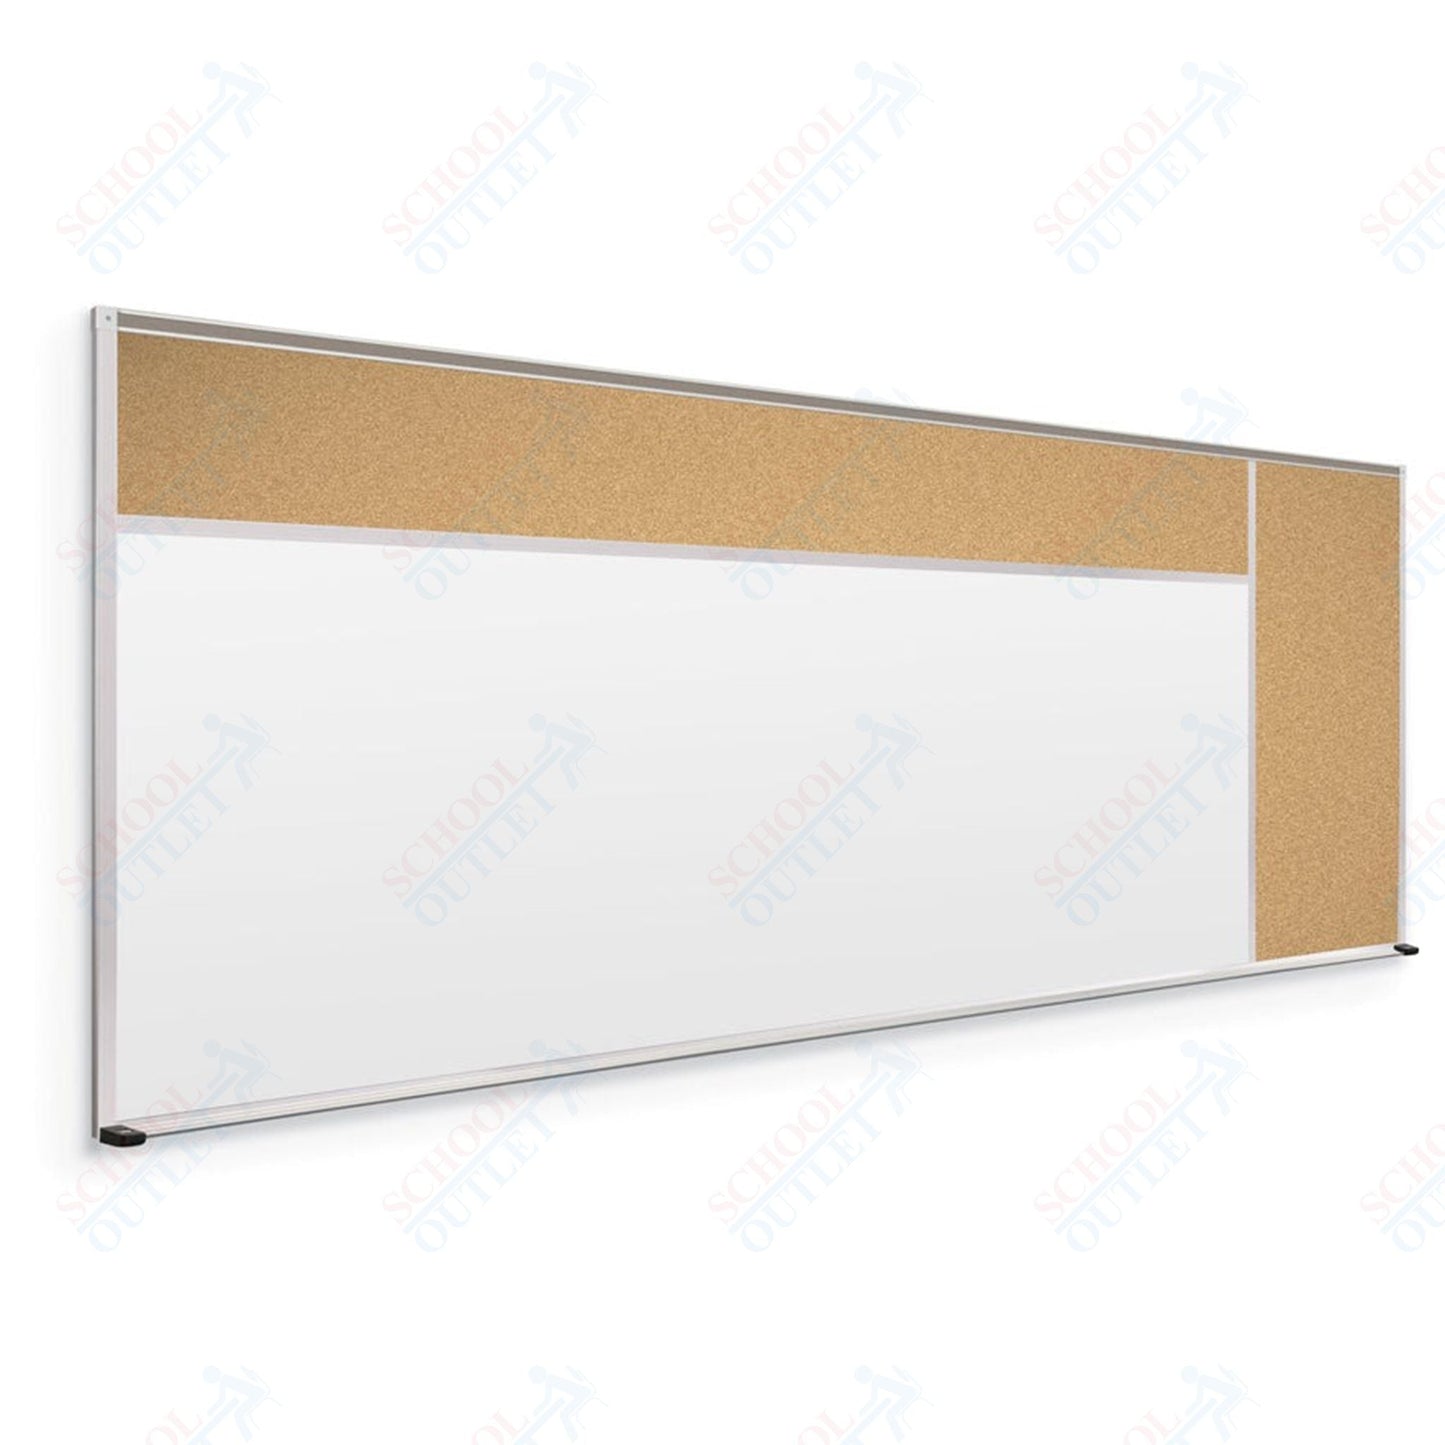 Mooreco Combination Board - Porcelain Steel Markerboard and Natural Cork Tackboard (Type D) - SchoolOutlet